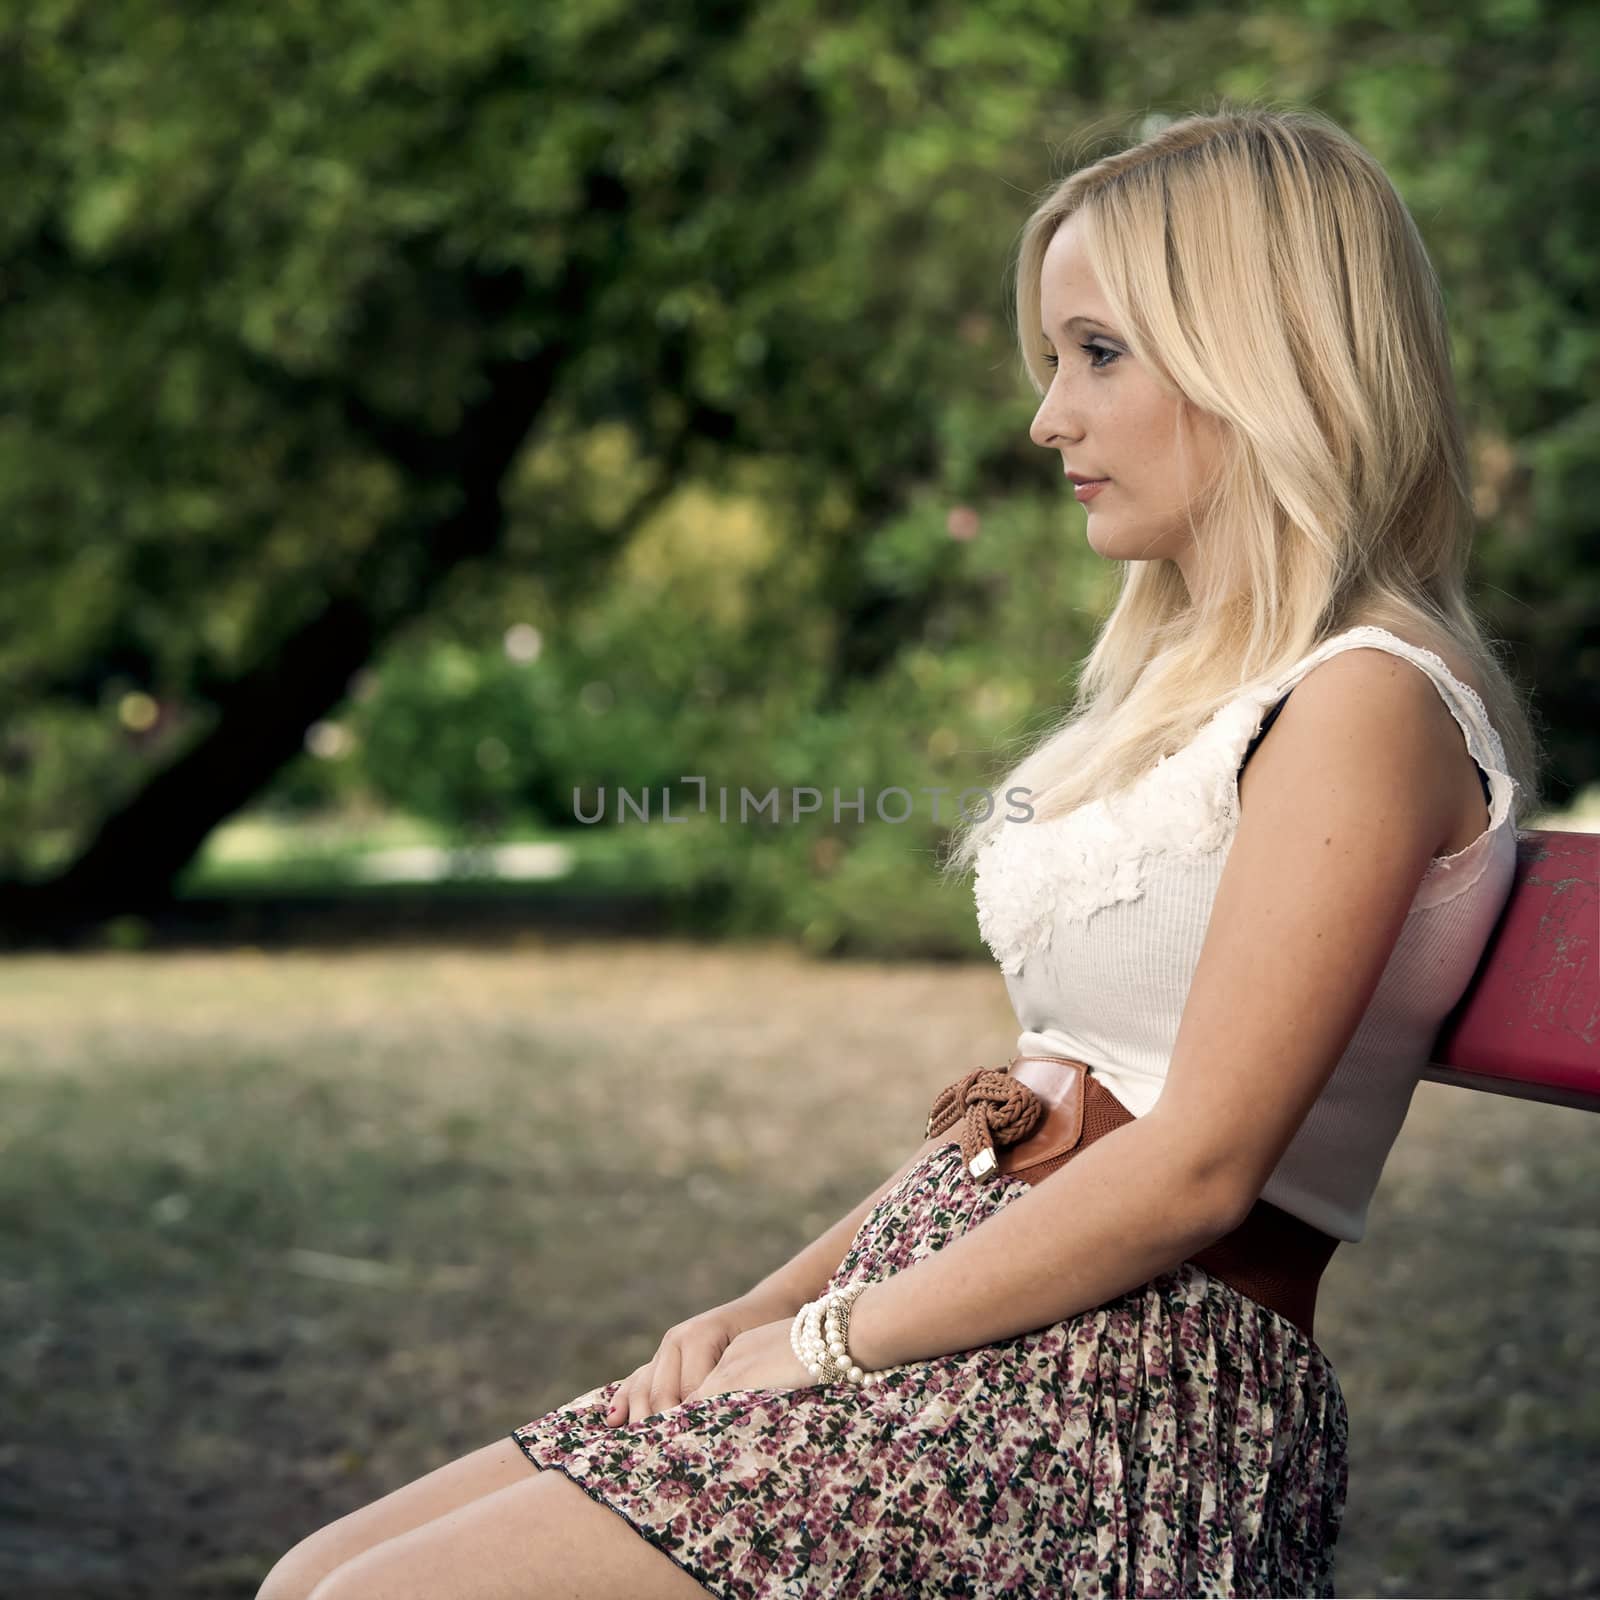 Beautiful young woman sitting on a park bench  and thinking on something